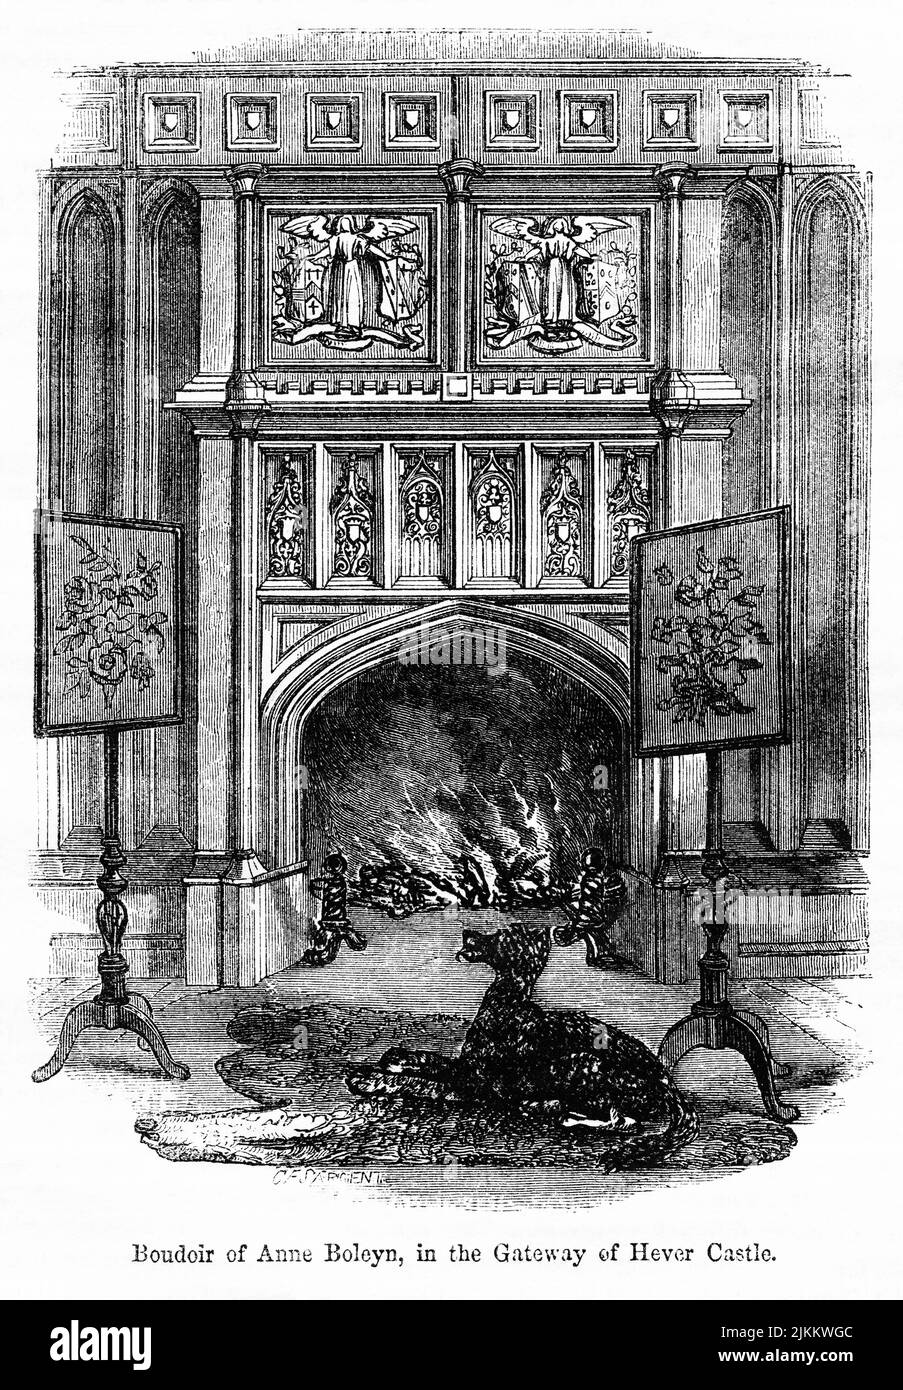 Boudoir of Anne Boleyn, in the Gateway of Hever Castle, Illustration from the Book, 'John Cassel’s Illustrated History of England, Volume II', text by William Howitt, Cassell, Petter, and Galpin, London, 1858 Stock Photo